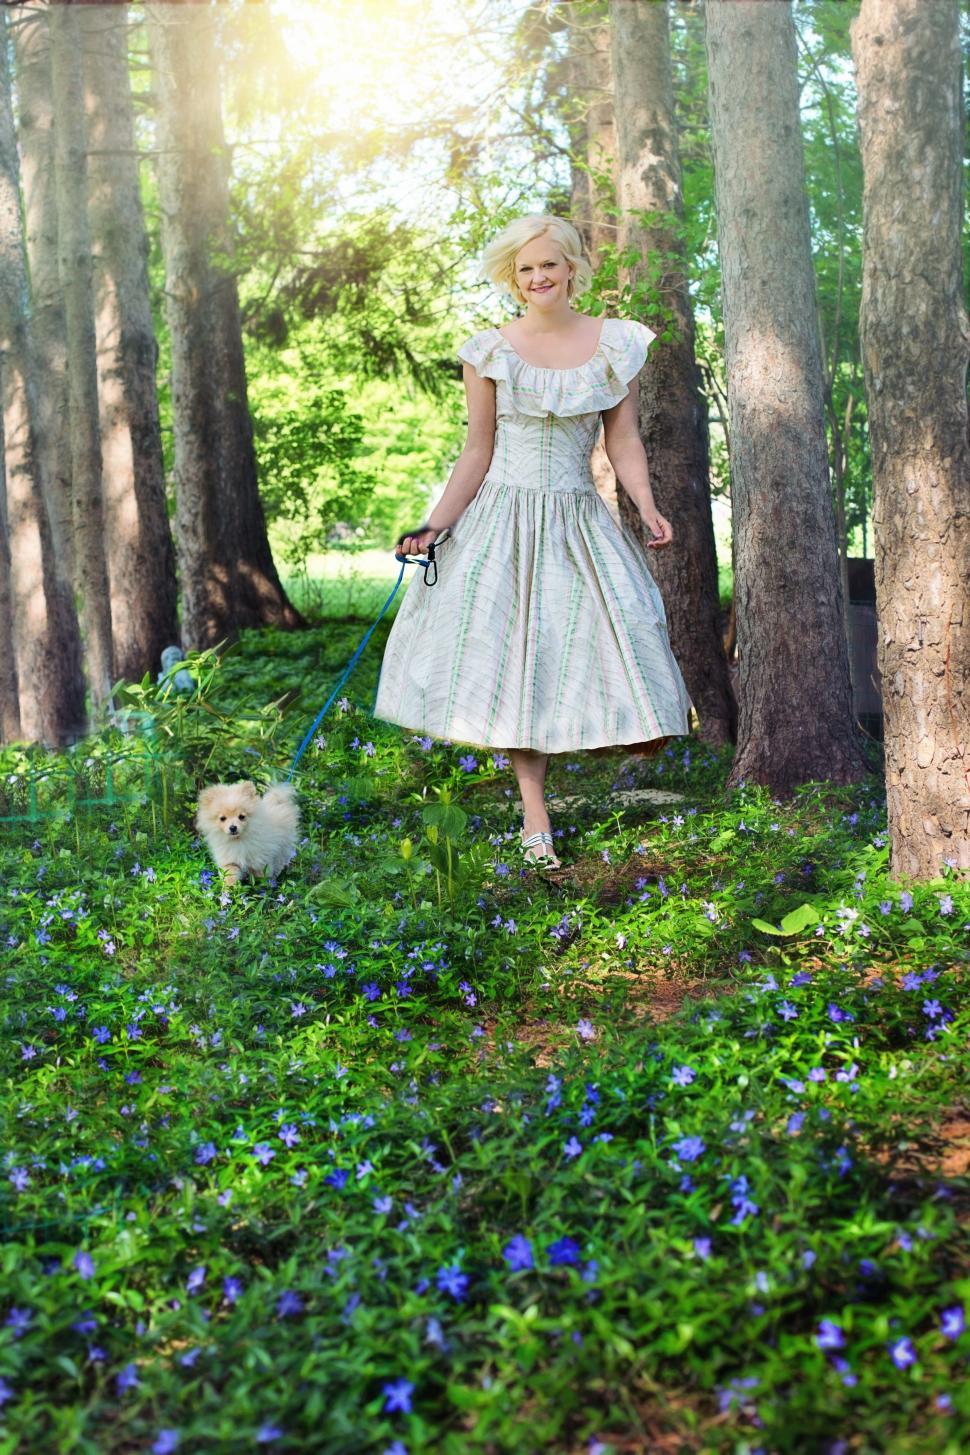 Free Image of Smiling Woman With Pomeranian dog in the garden - Looking at camera  